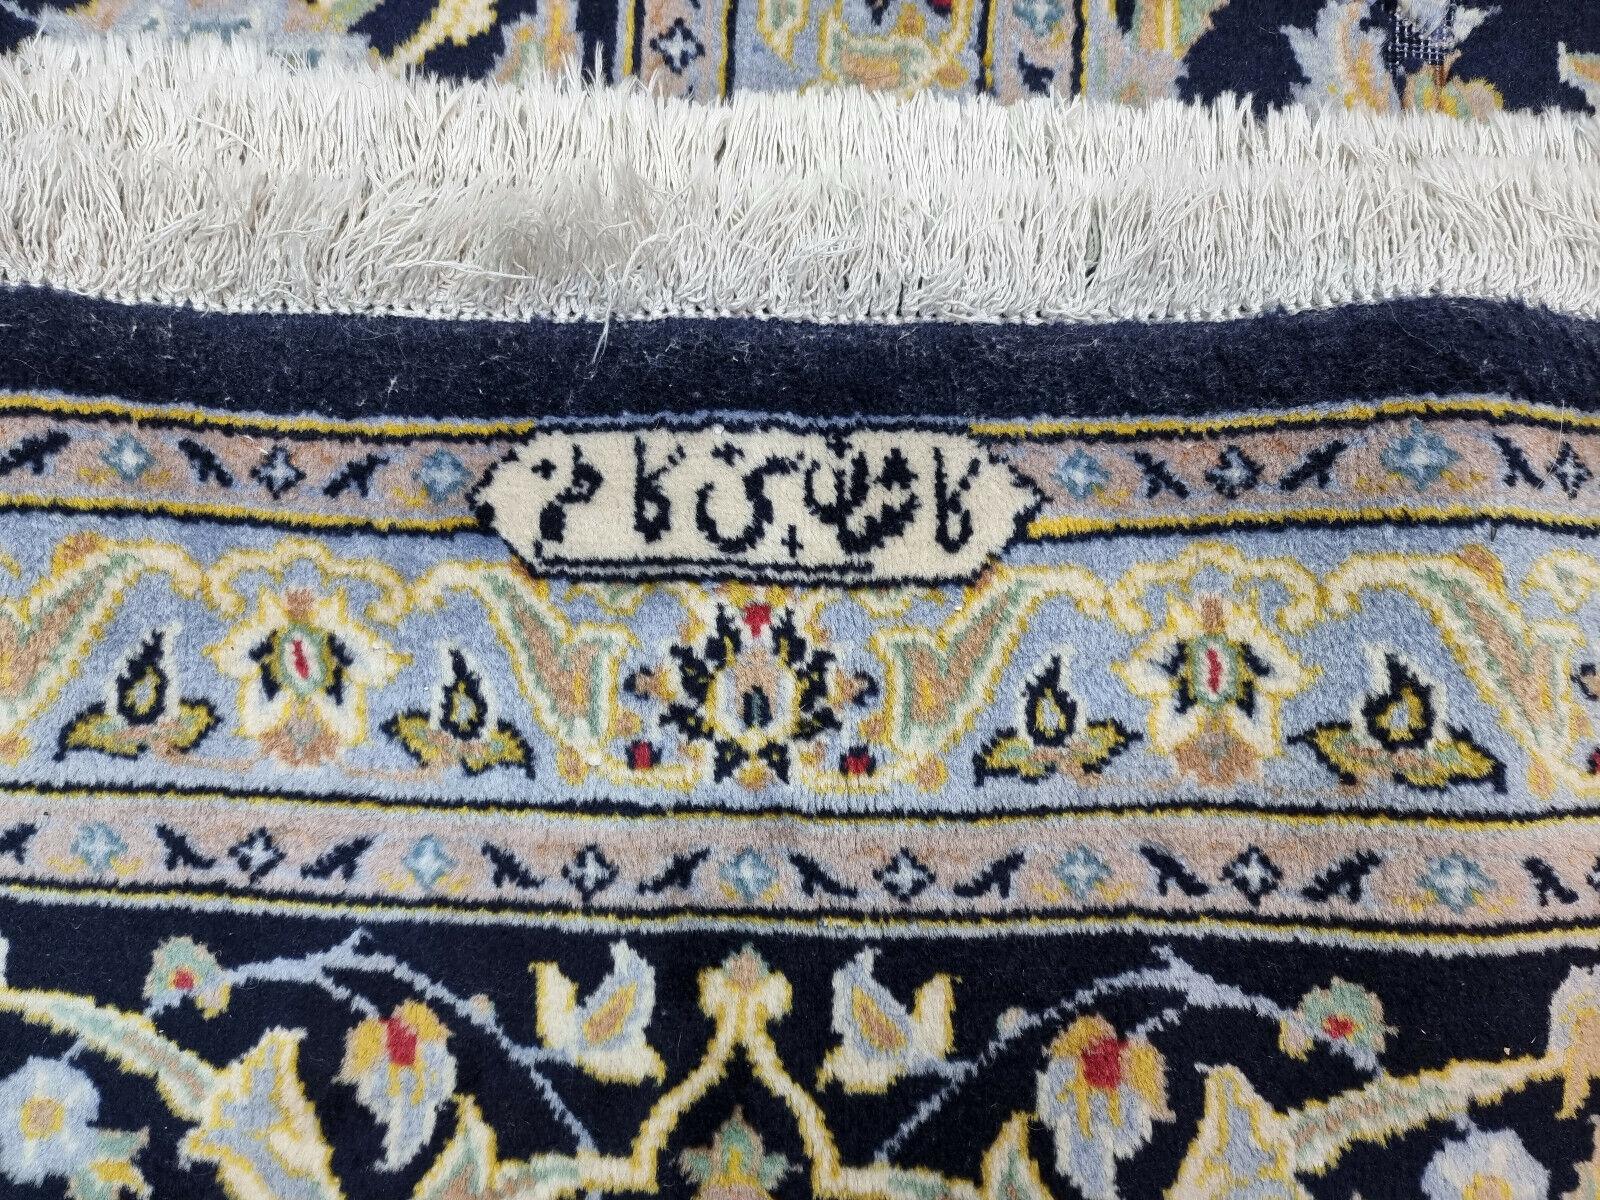 Wool Handmade Vintage Persian Style Kashan Oversize Rug 10.1' x 14.4', 1970s - 1D69 For Sale